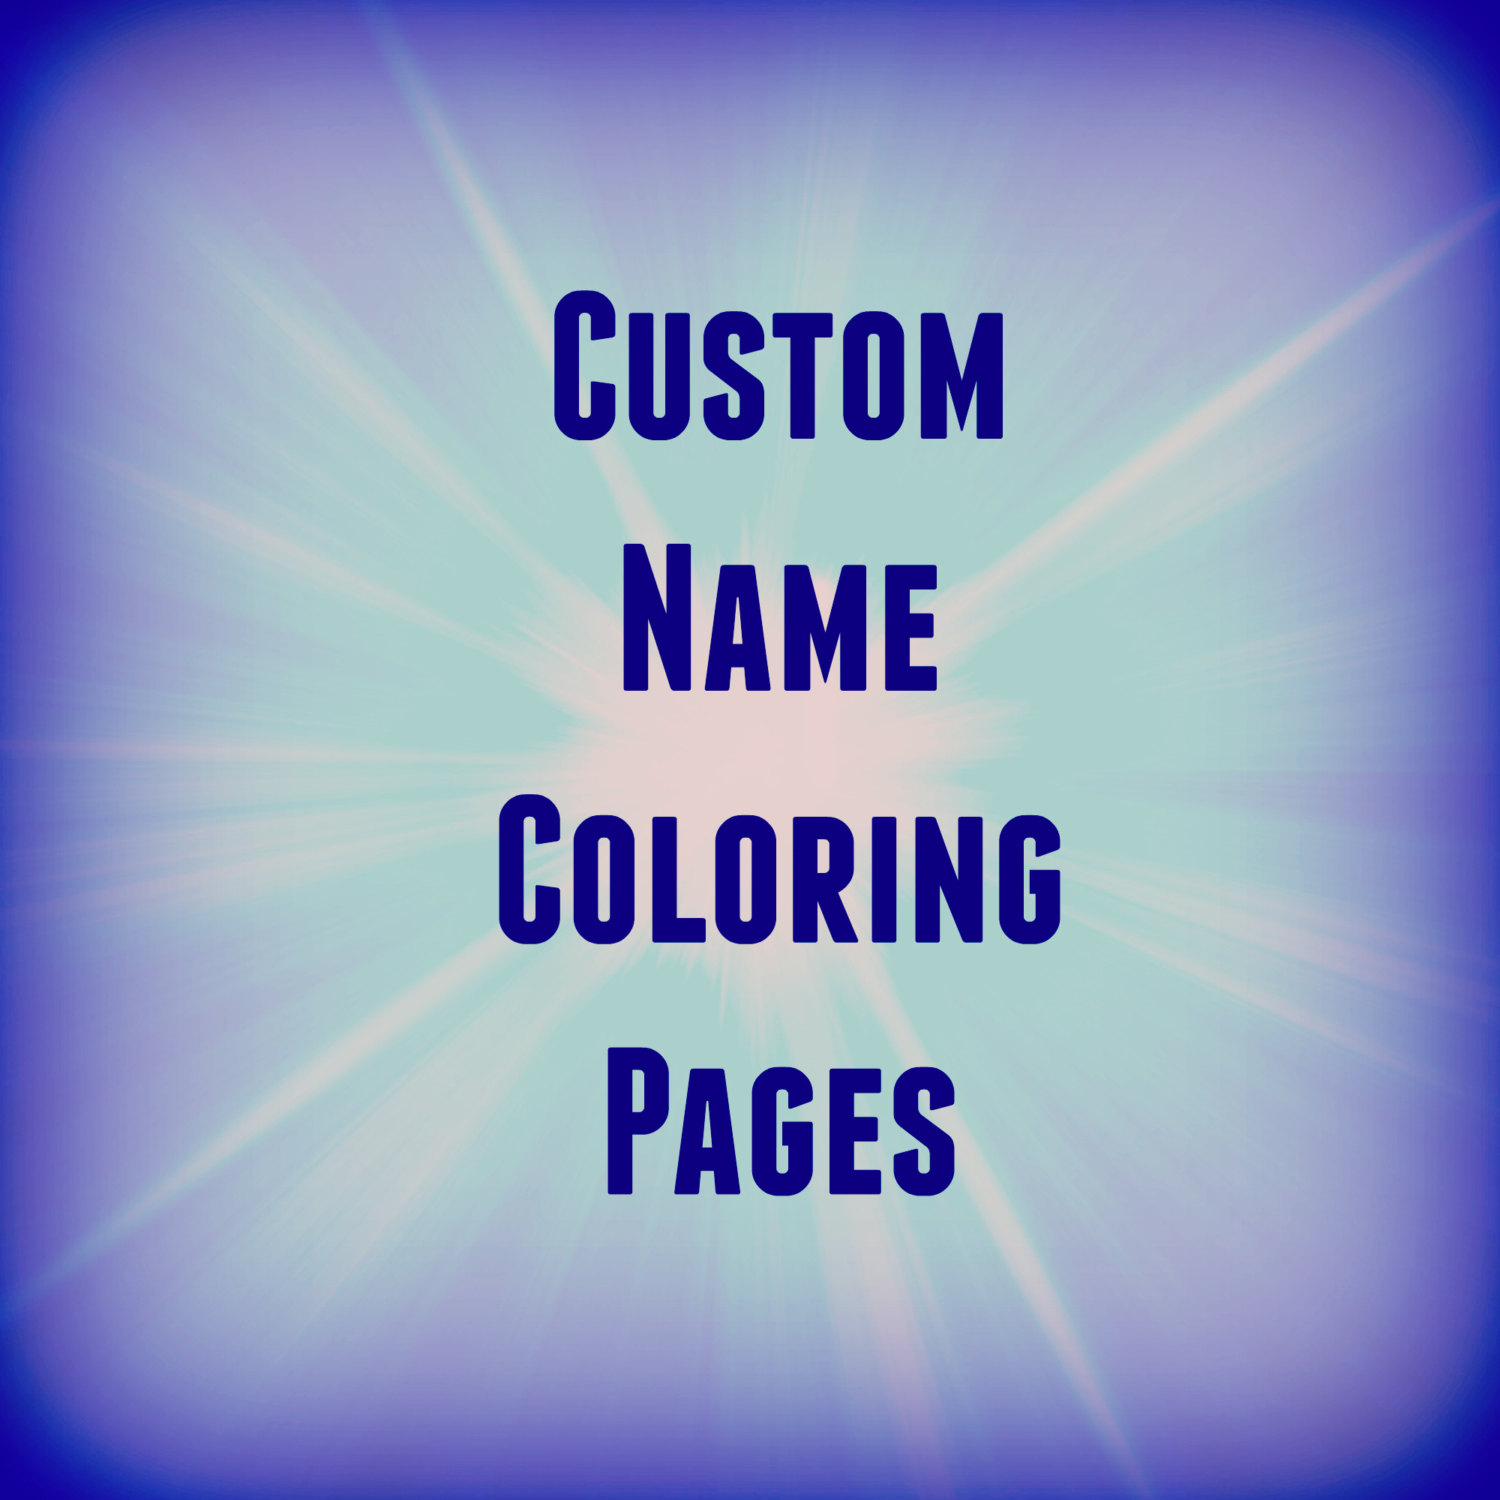 Personalized Coloring Pages Coloring Ideas Custom Coloring Pages From Photos Remarkable